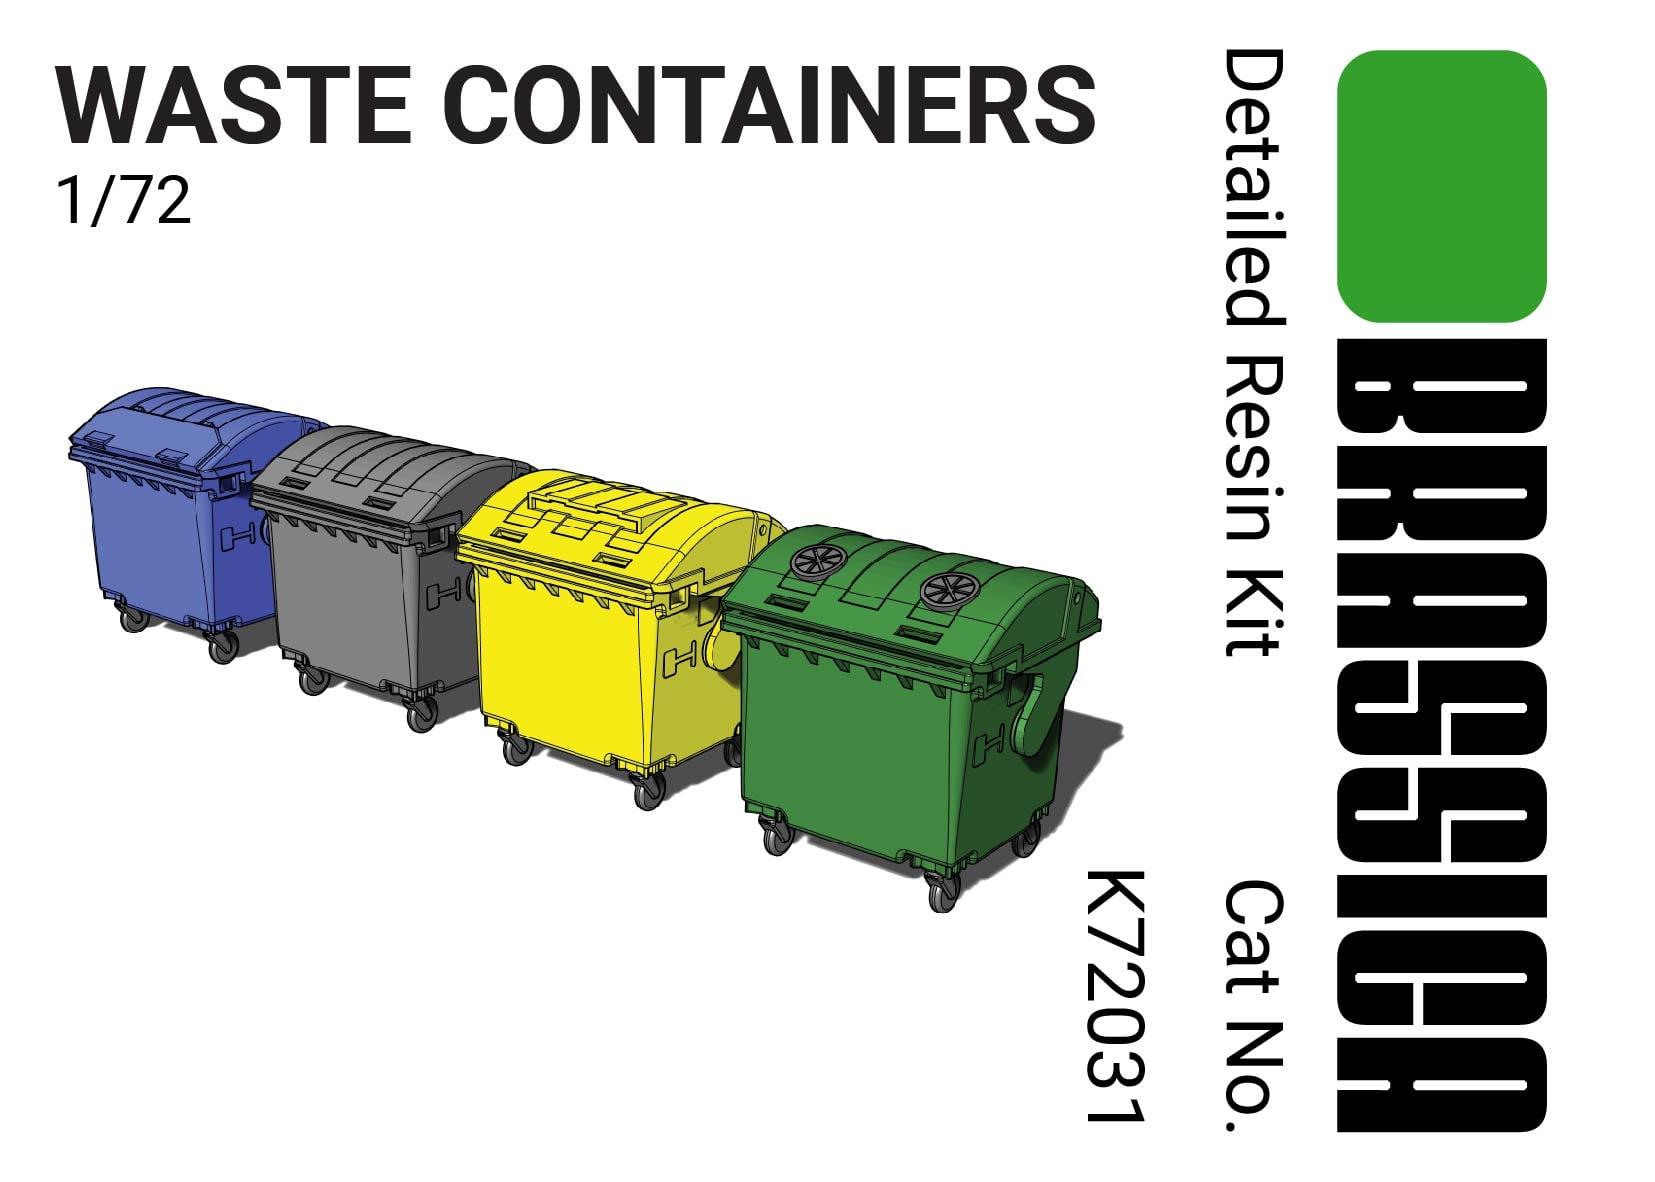 Sorted Waste Containers